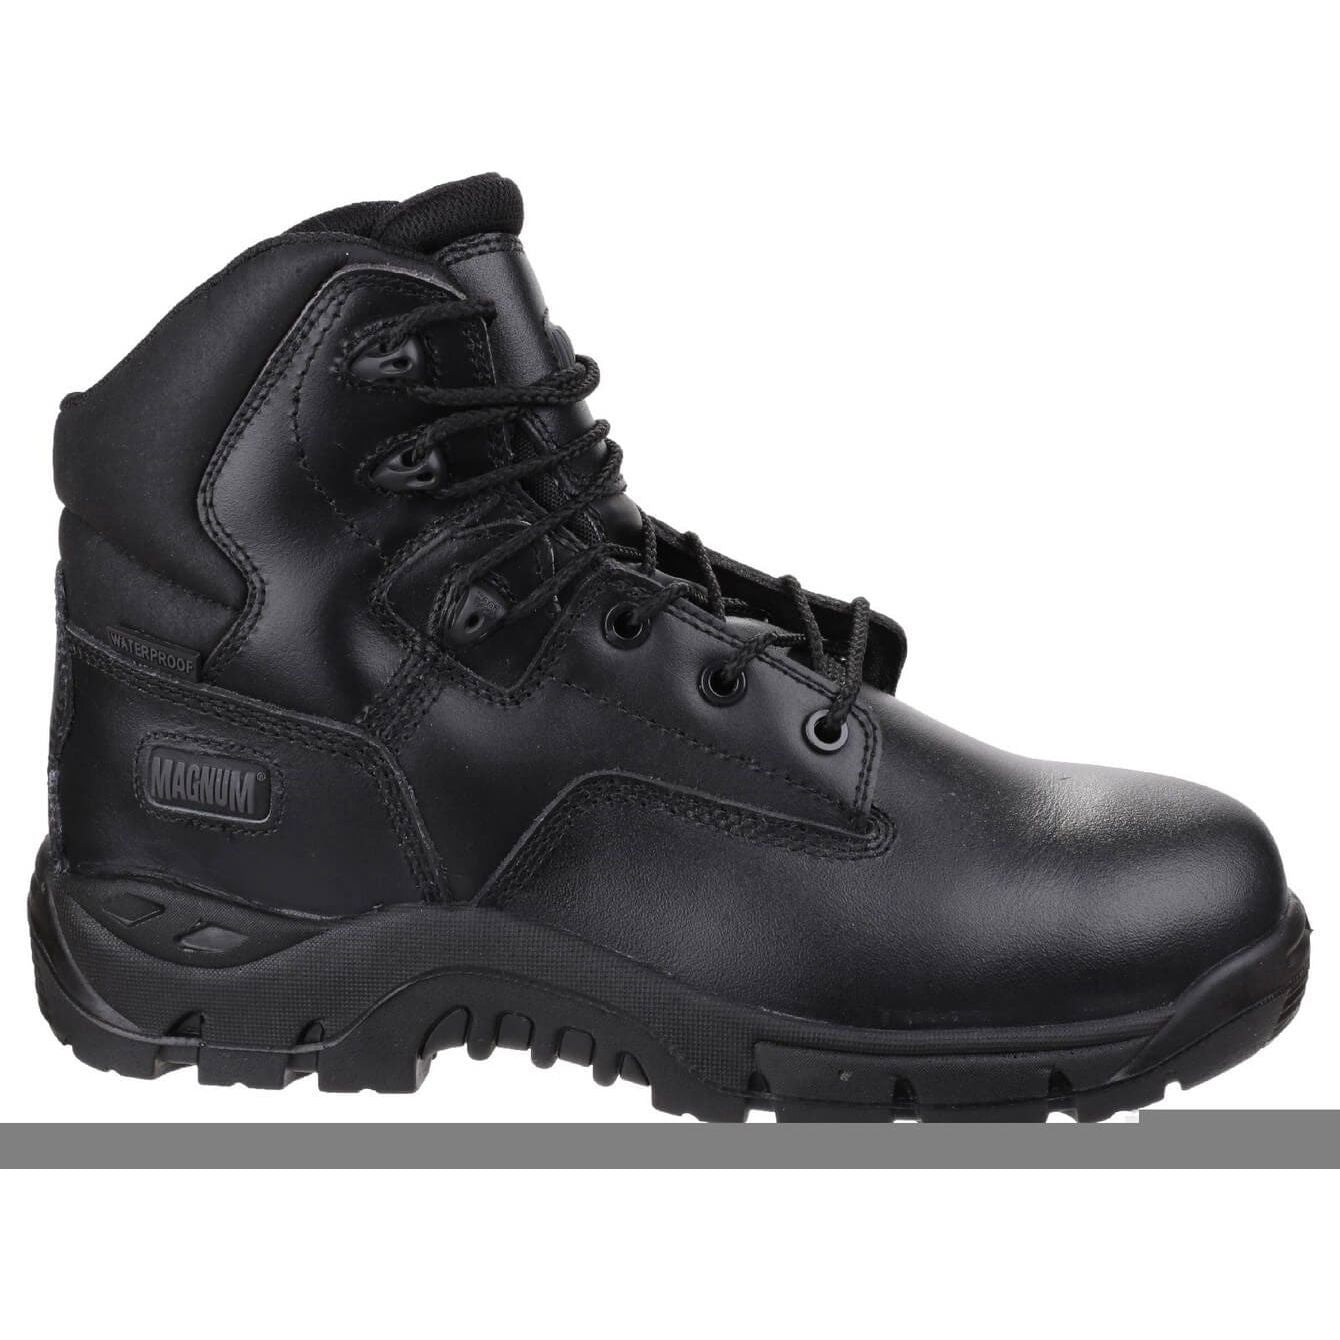 Magnum Precision Sitemaster Safety Boots-Black-5